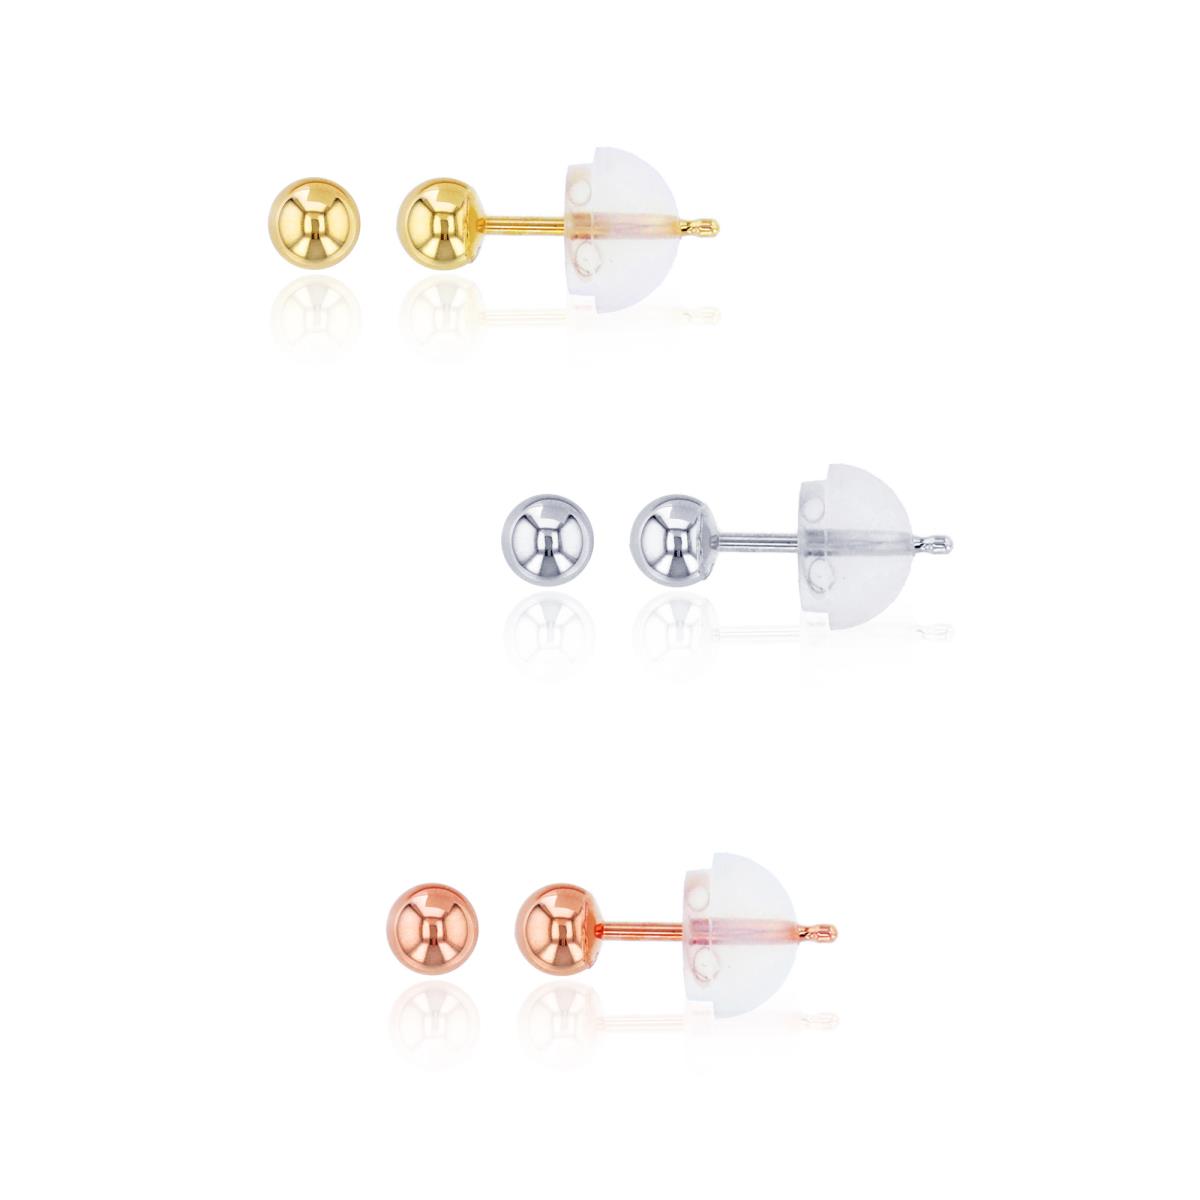 14K Gold Tricolor WYR 3MM Tricolor Ball Stud Earring Set with Gold Silicone backs